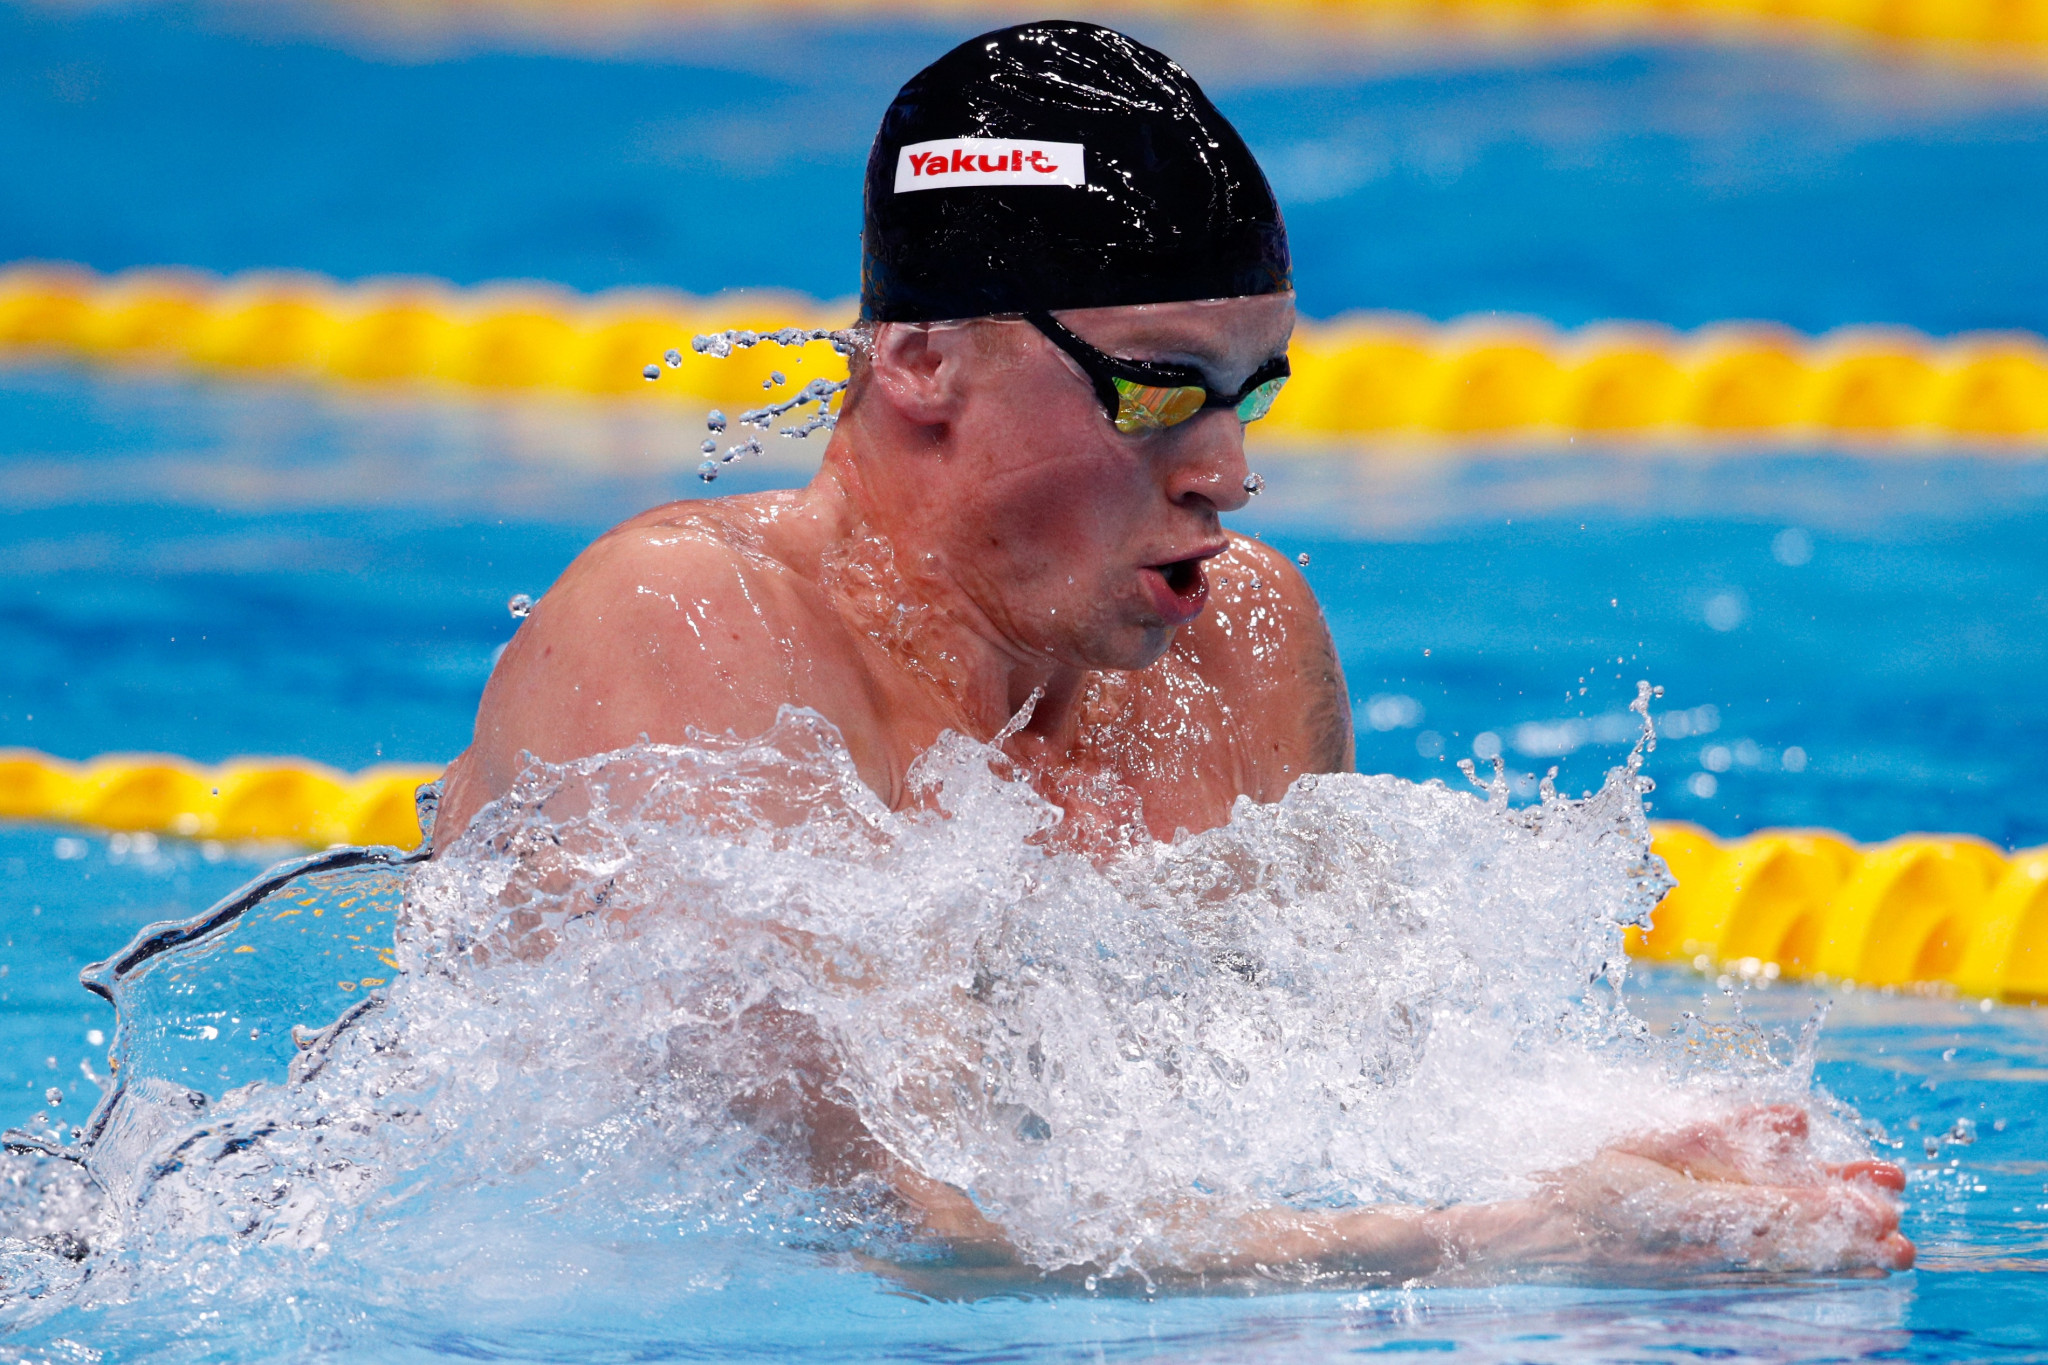 Great Britain's Adam Peaty narrowly missed out on the men's 100m breaststroke world record ©Getty Images